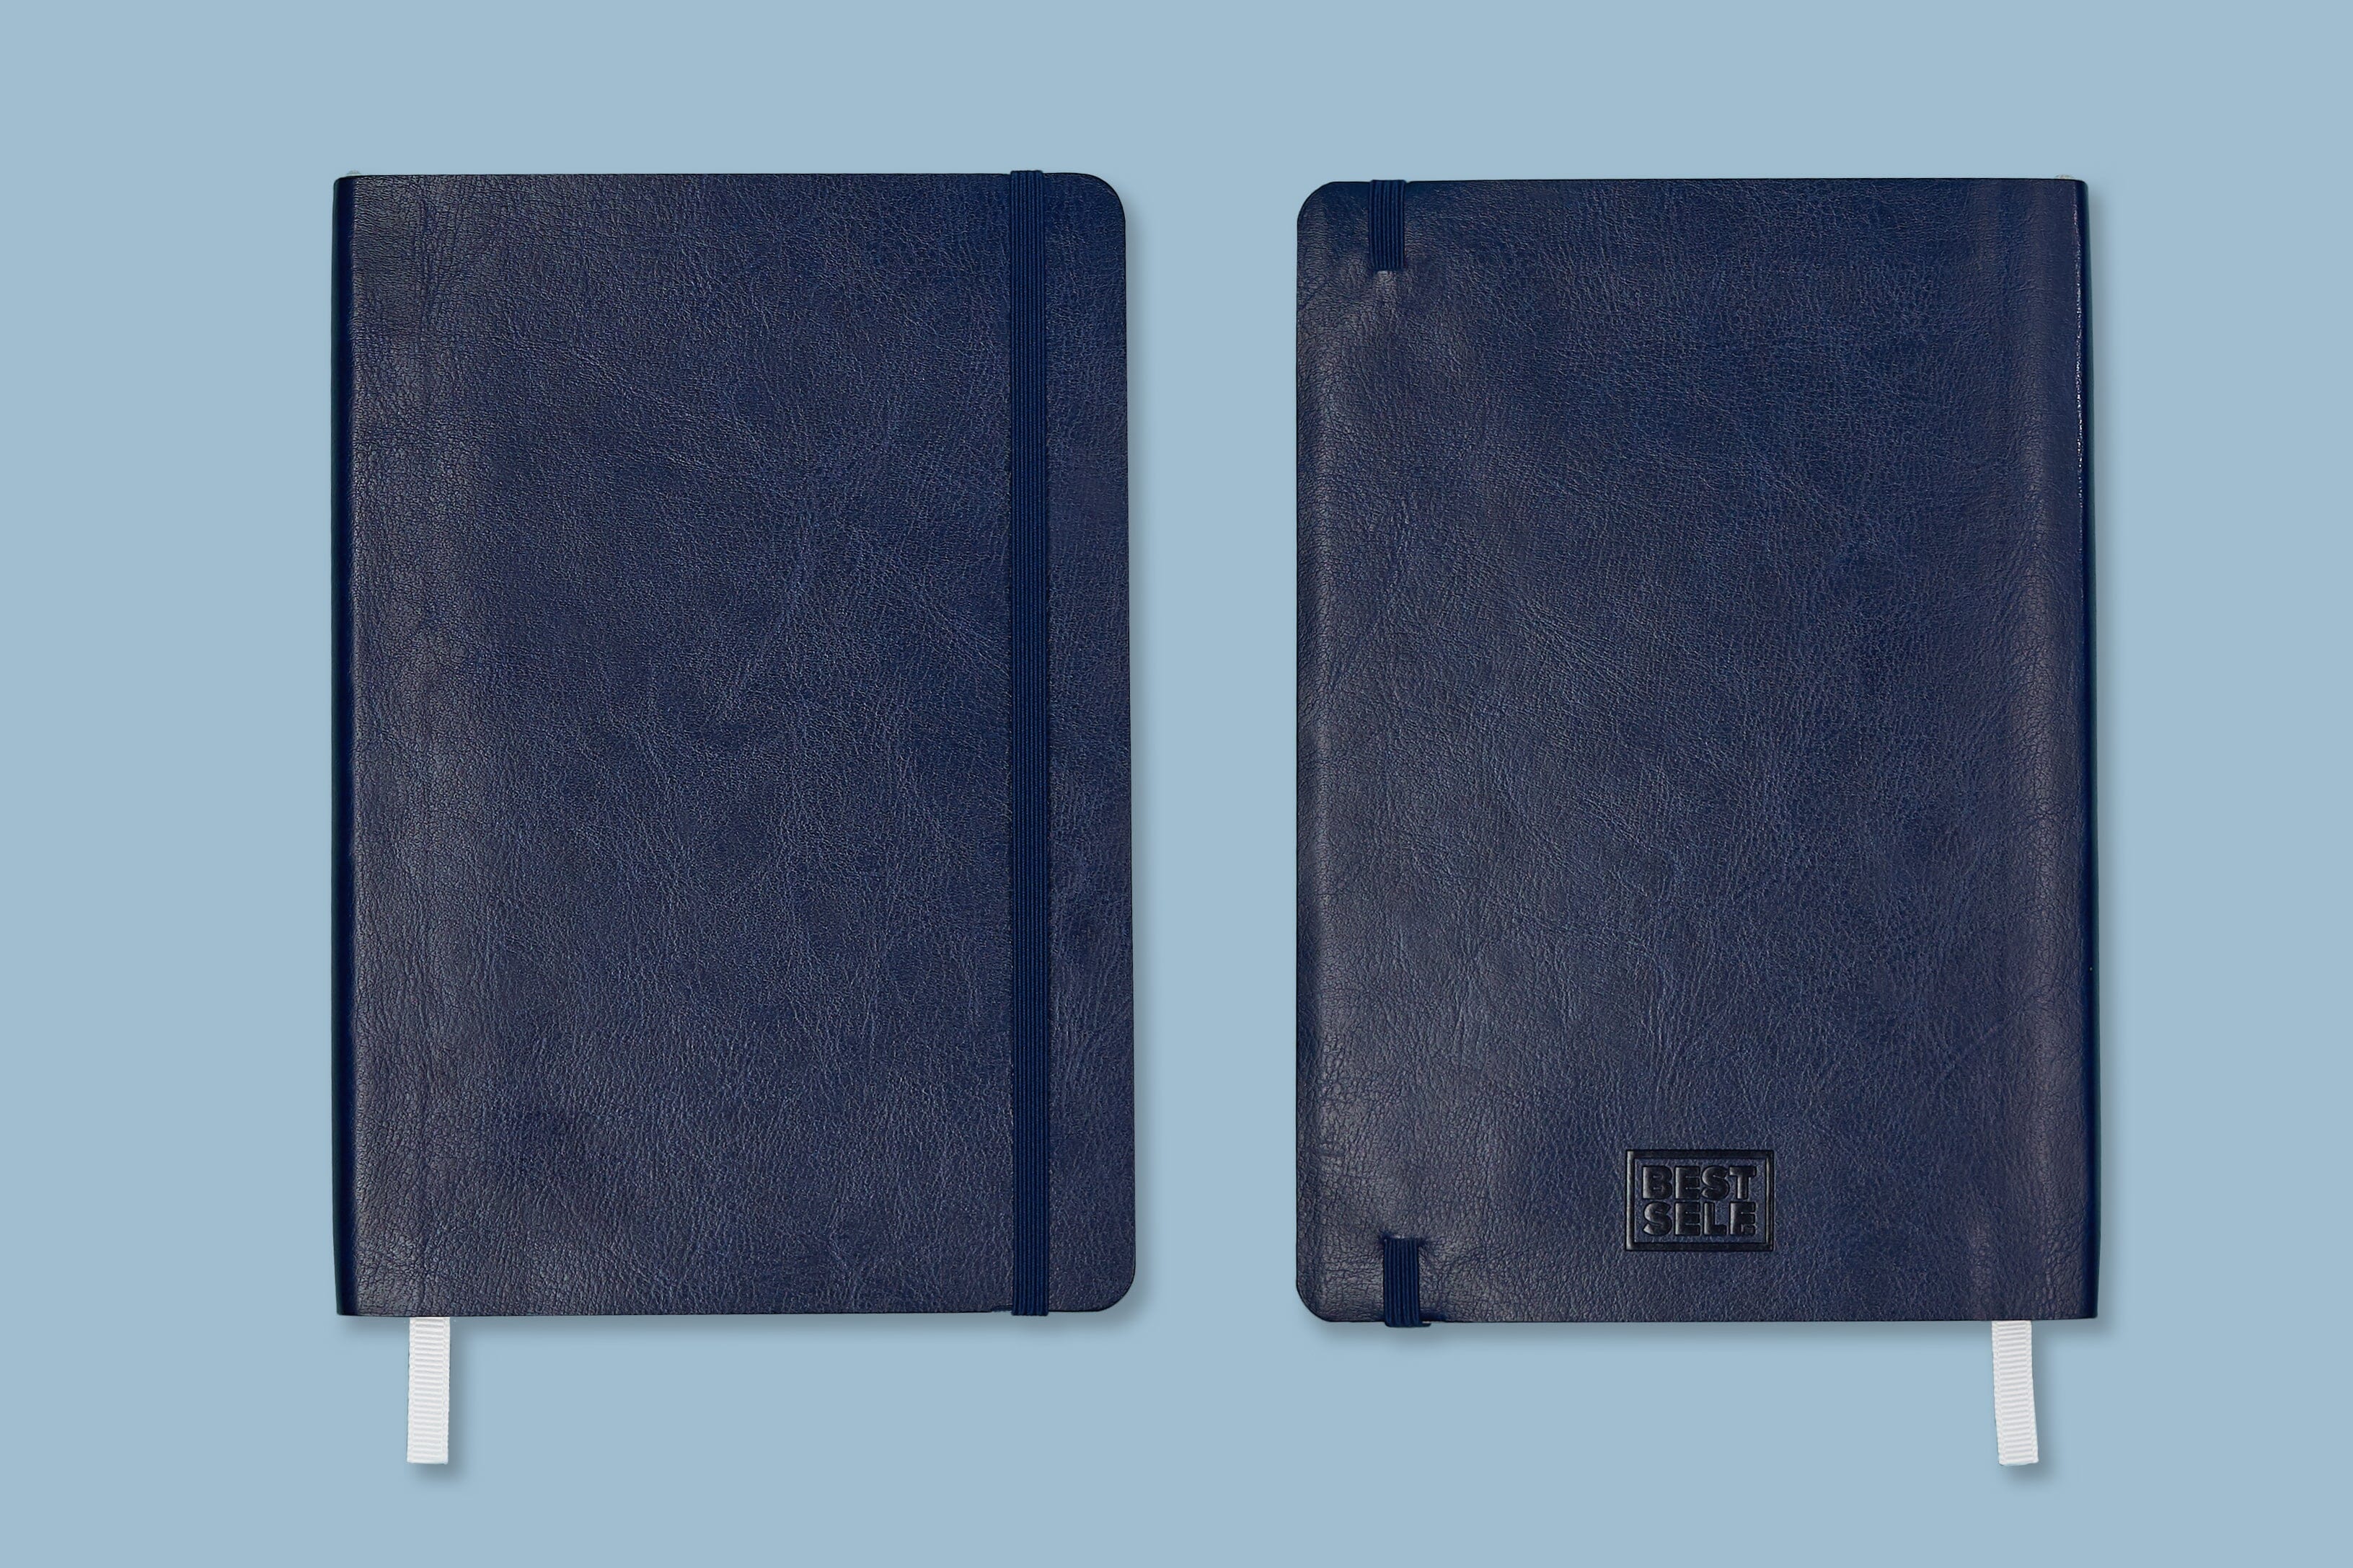 Scribe Notebook closed front view and back view side by side with no package